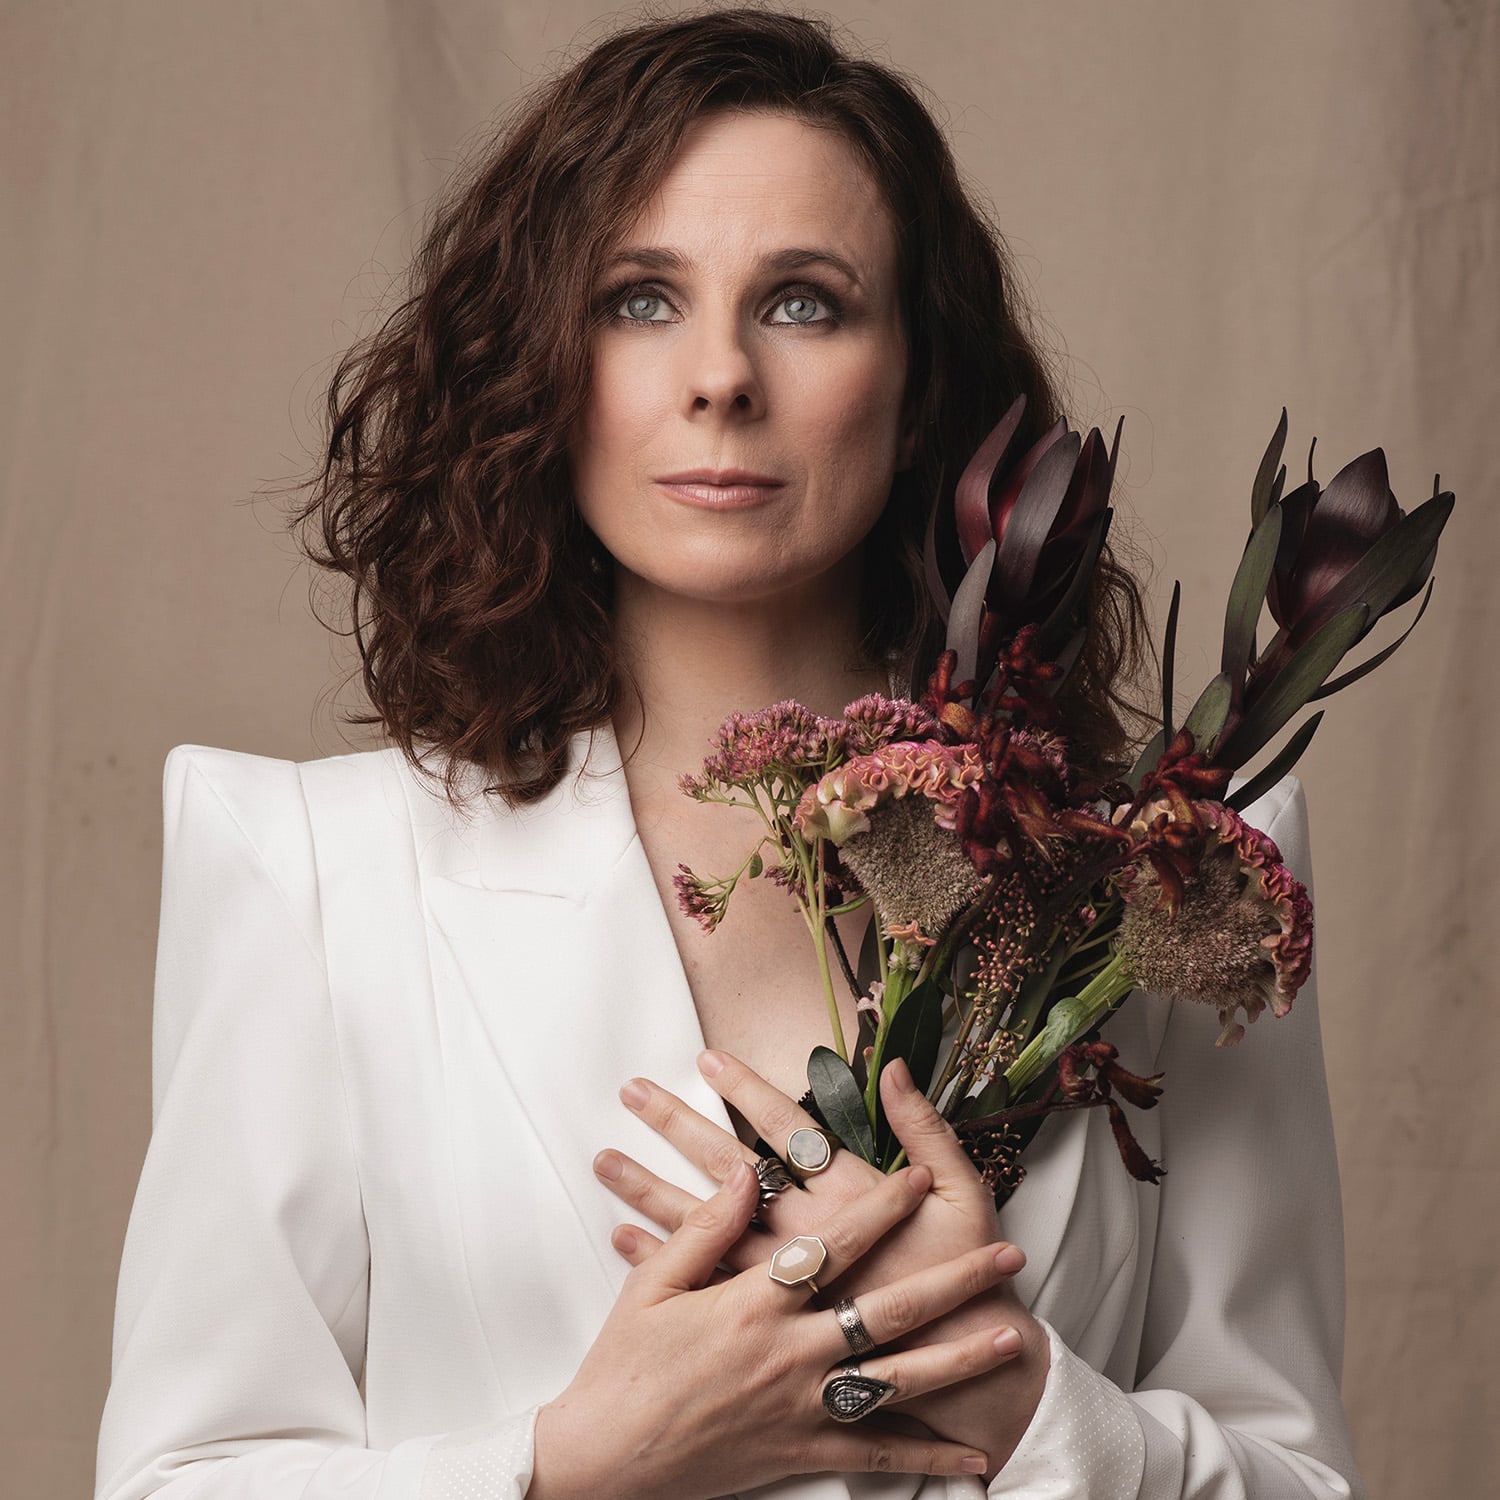 Profile photo of Cariad Lloyd wearing a white top holding a bunch of flowers